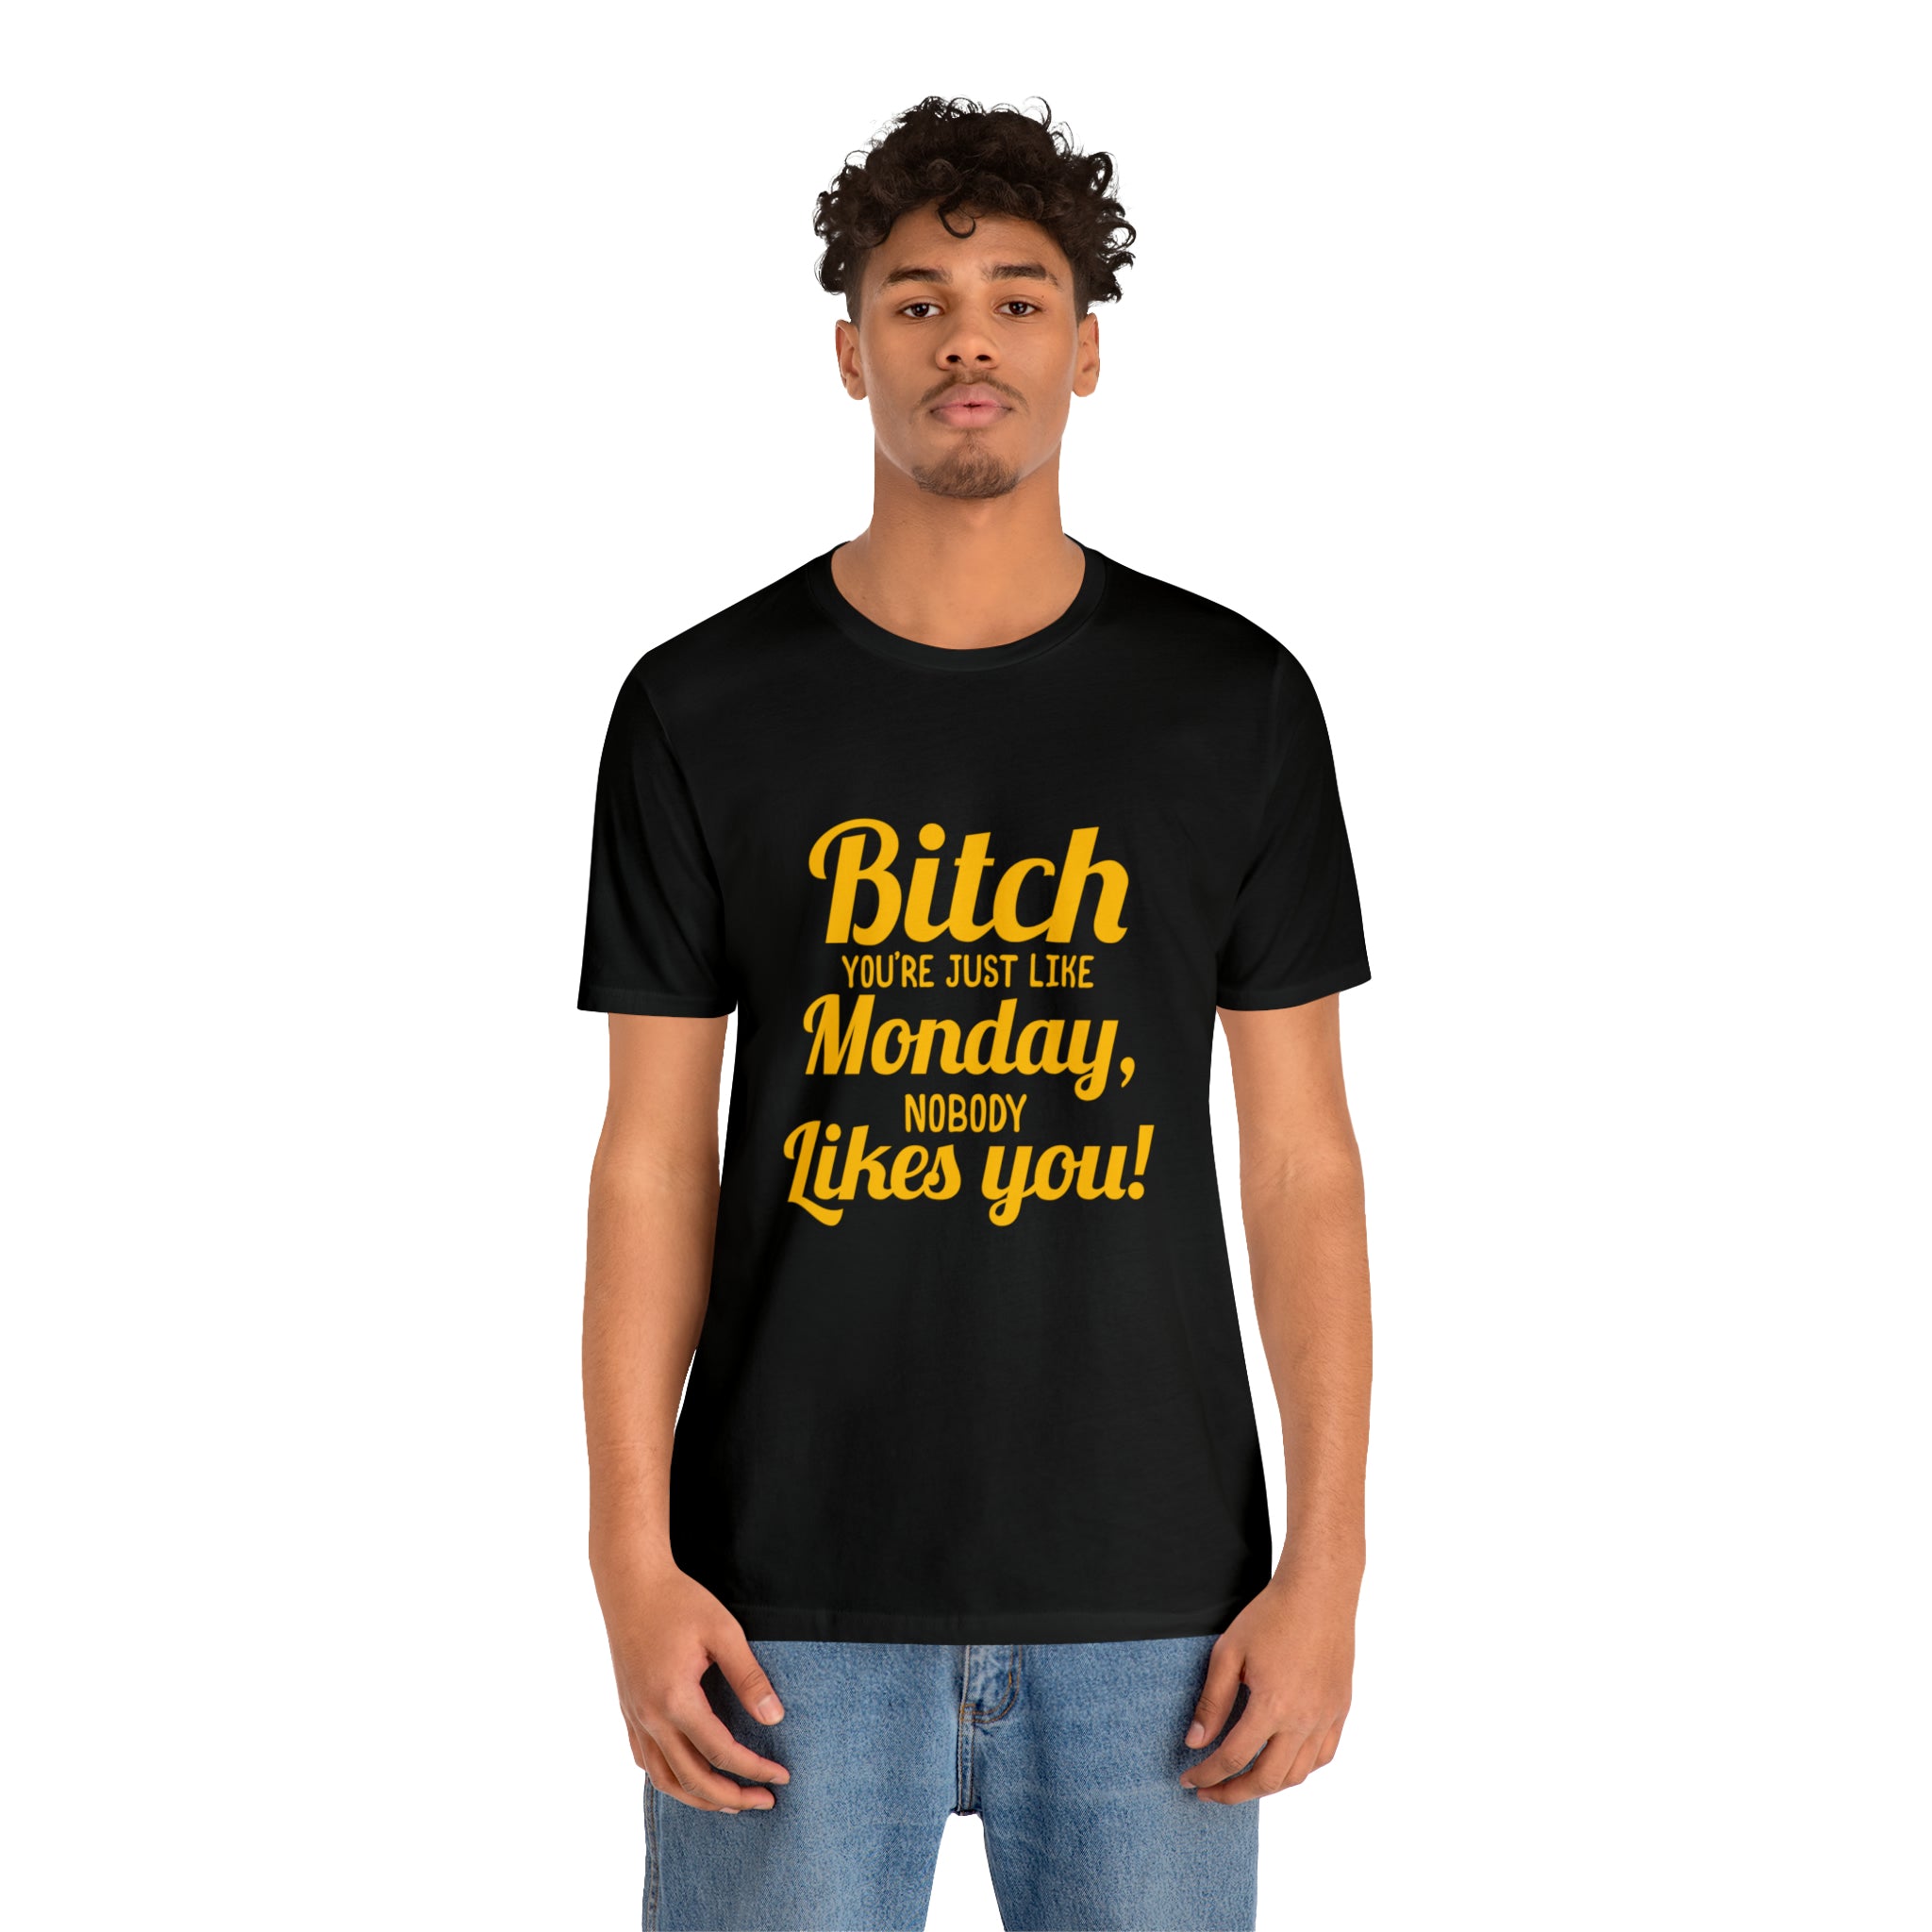 A man wearing a "Bitch you are just like Monday nobody likes you" T-shirt likes you.